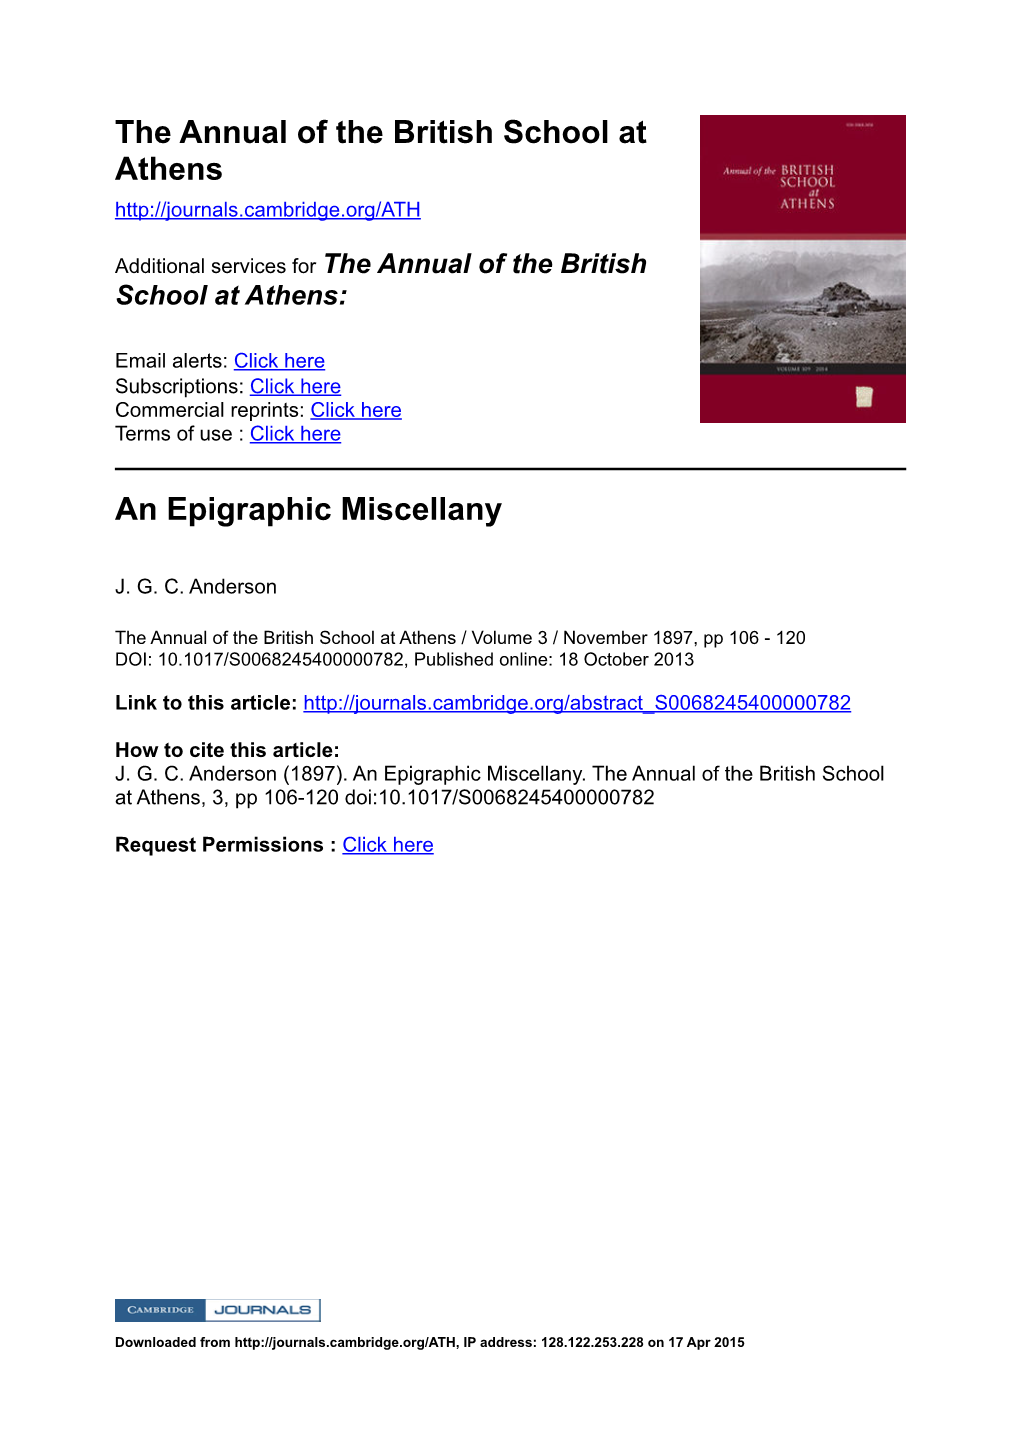 The Annual of the British School at Athens an Epigraphic Miscellany